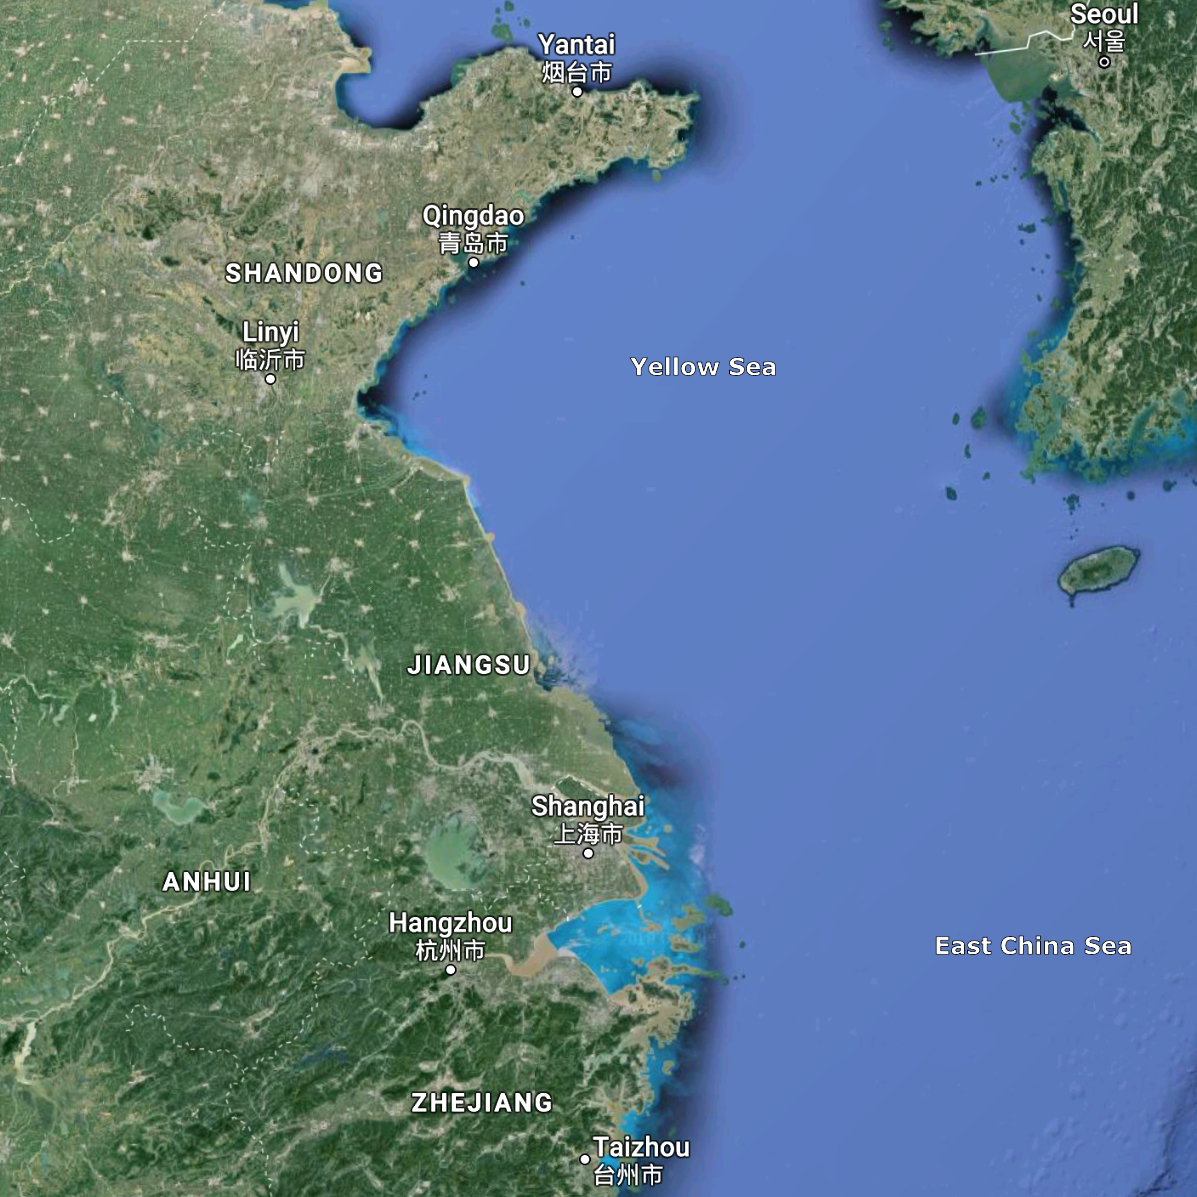 Algal blooms are common in the Yellow Sea and off the Yangtze estuary in the East China Sea (Image: Google Earth)